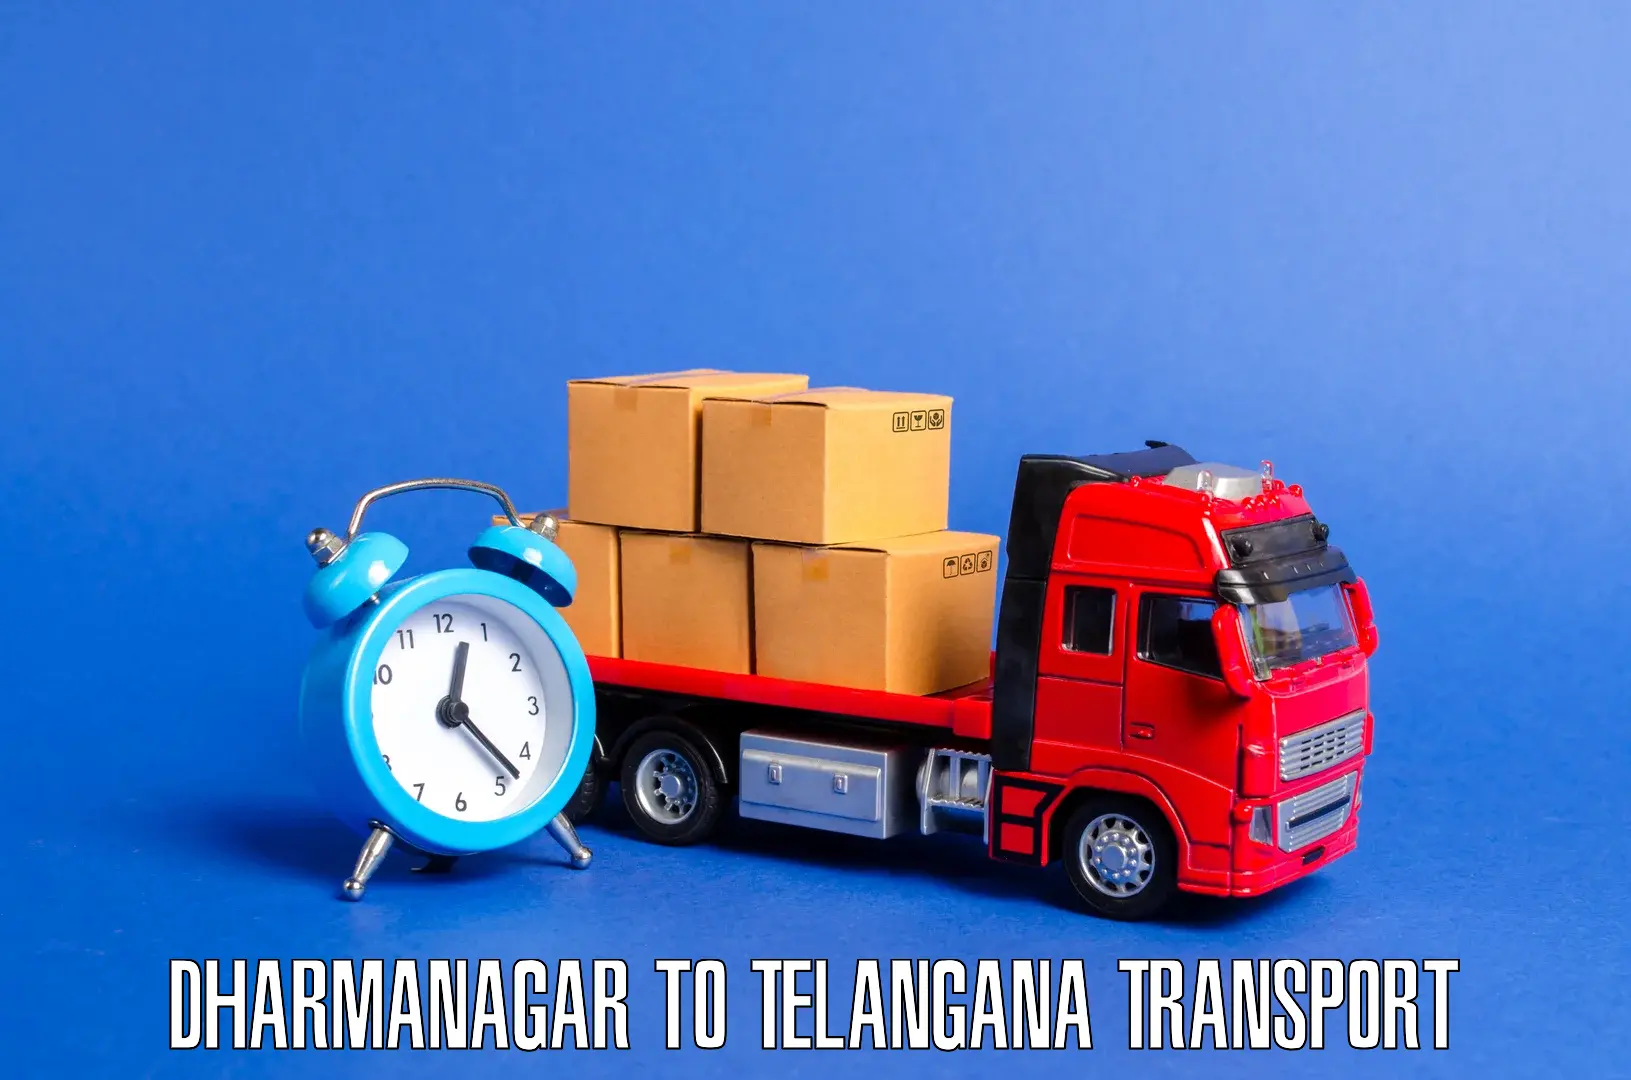 Lorry transport service Dharmanagar to Secunderabad